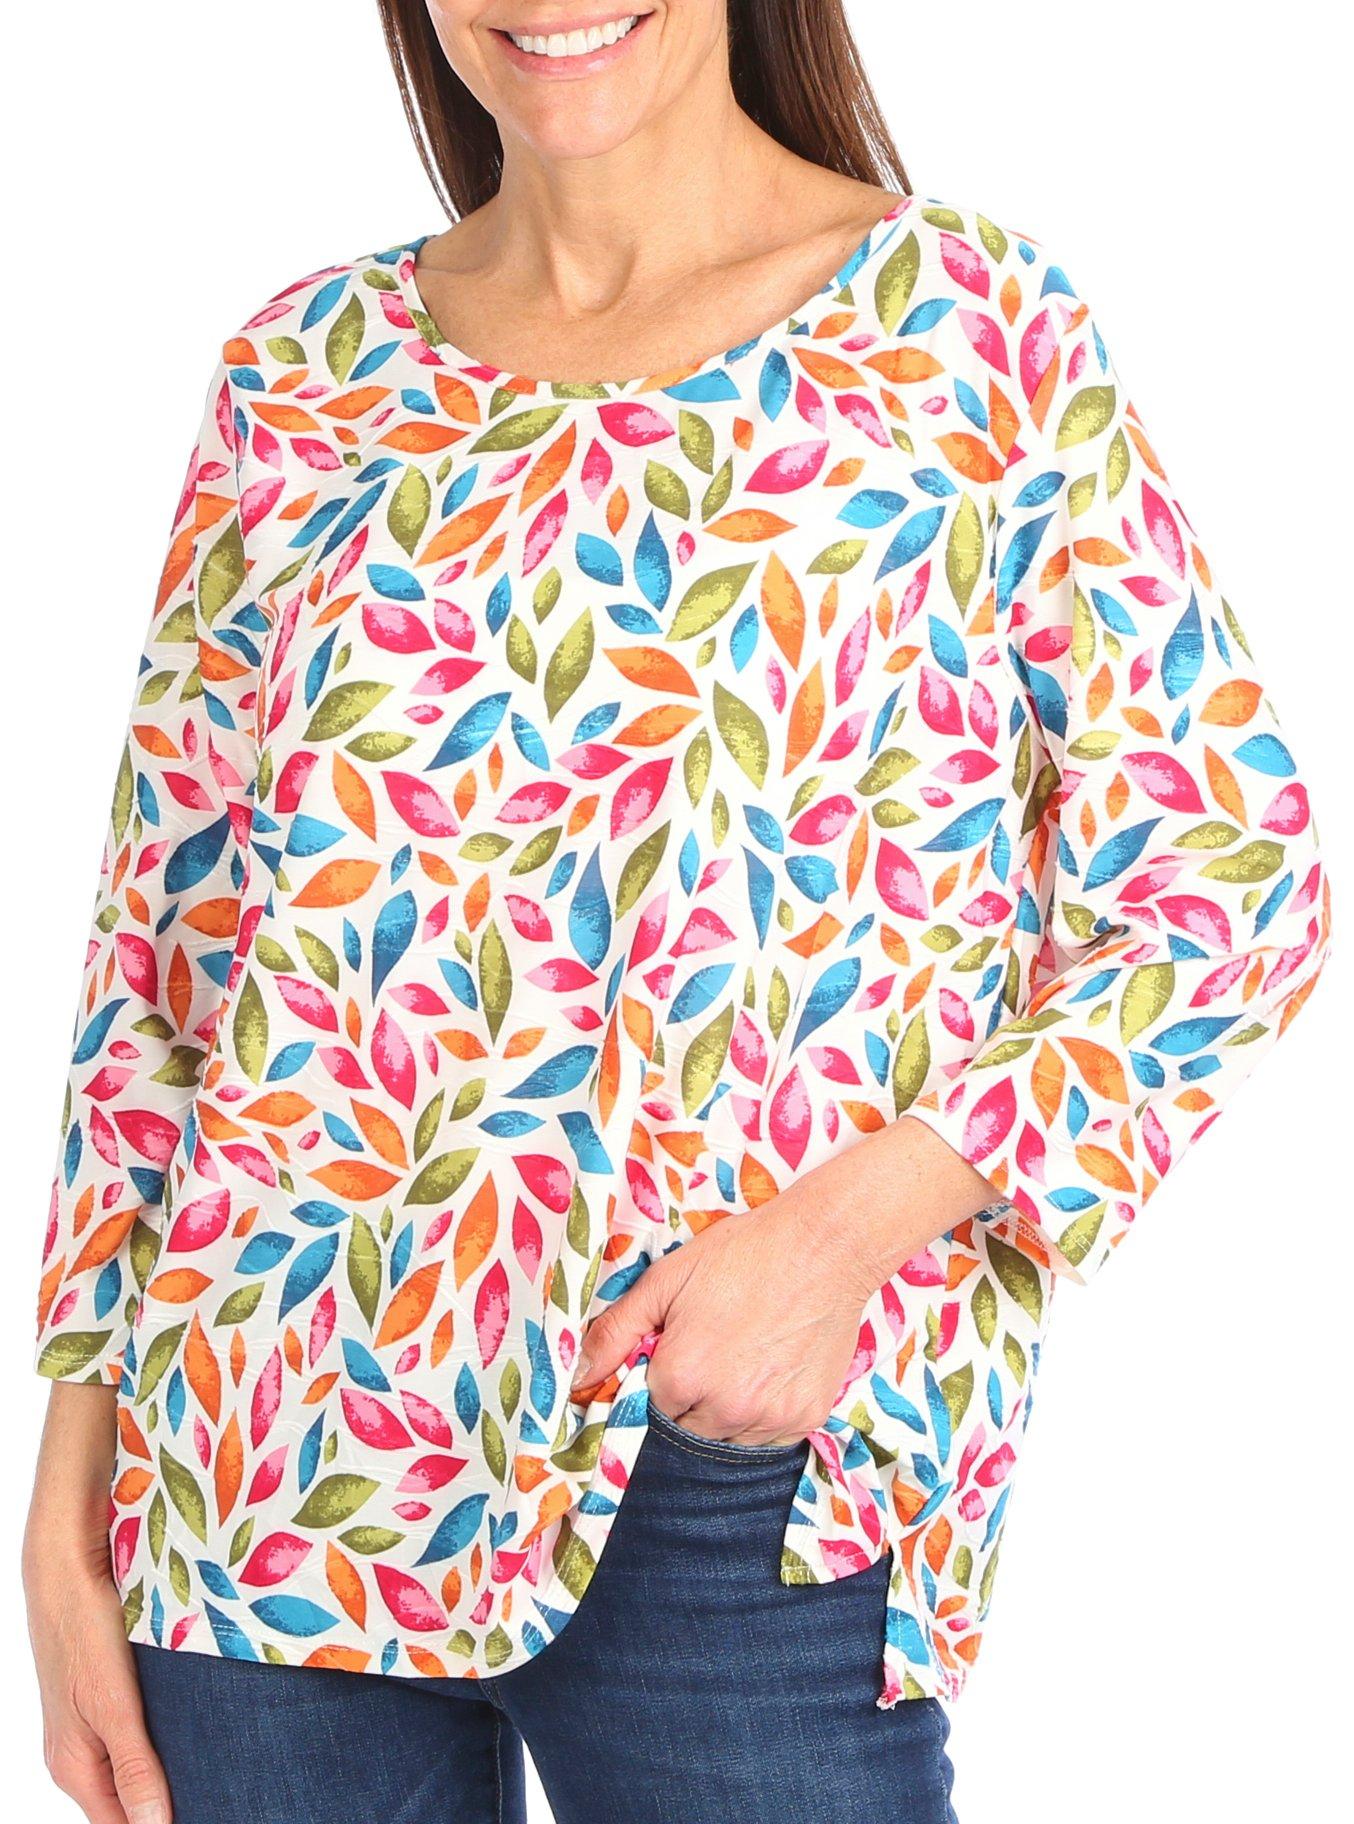 Juniper + Lime Womens Colorful 3/4 Sleeve Top